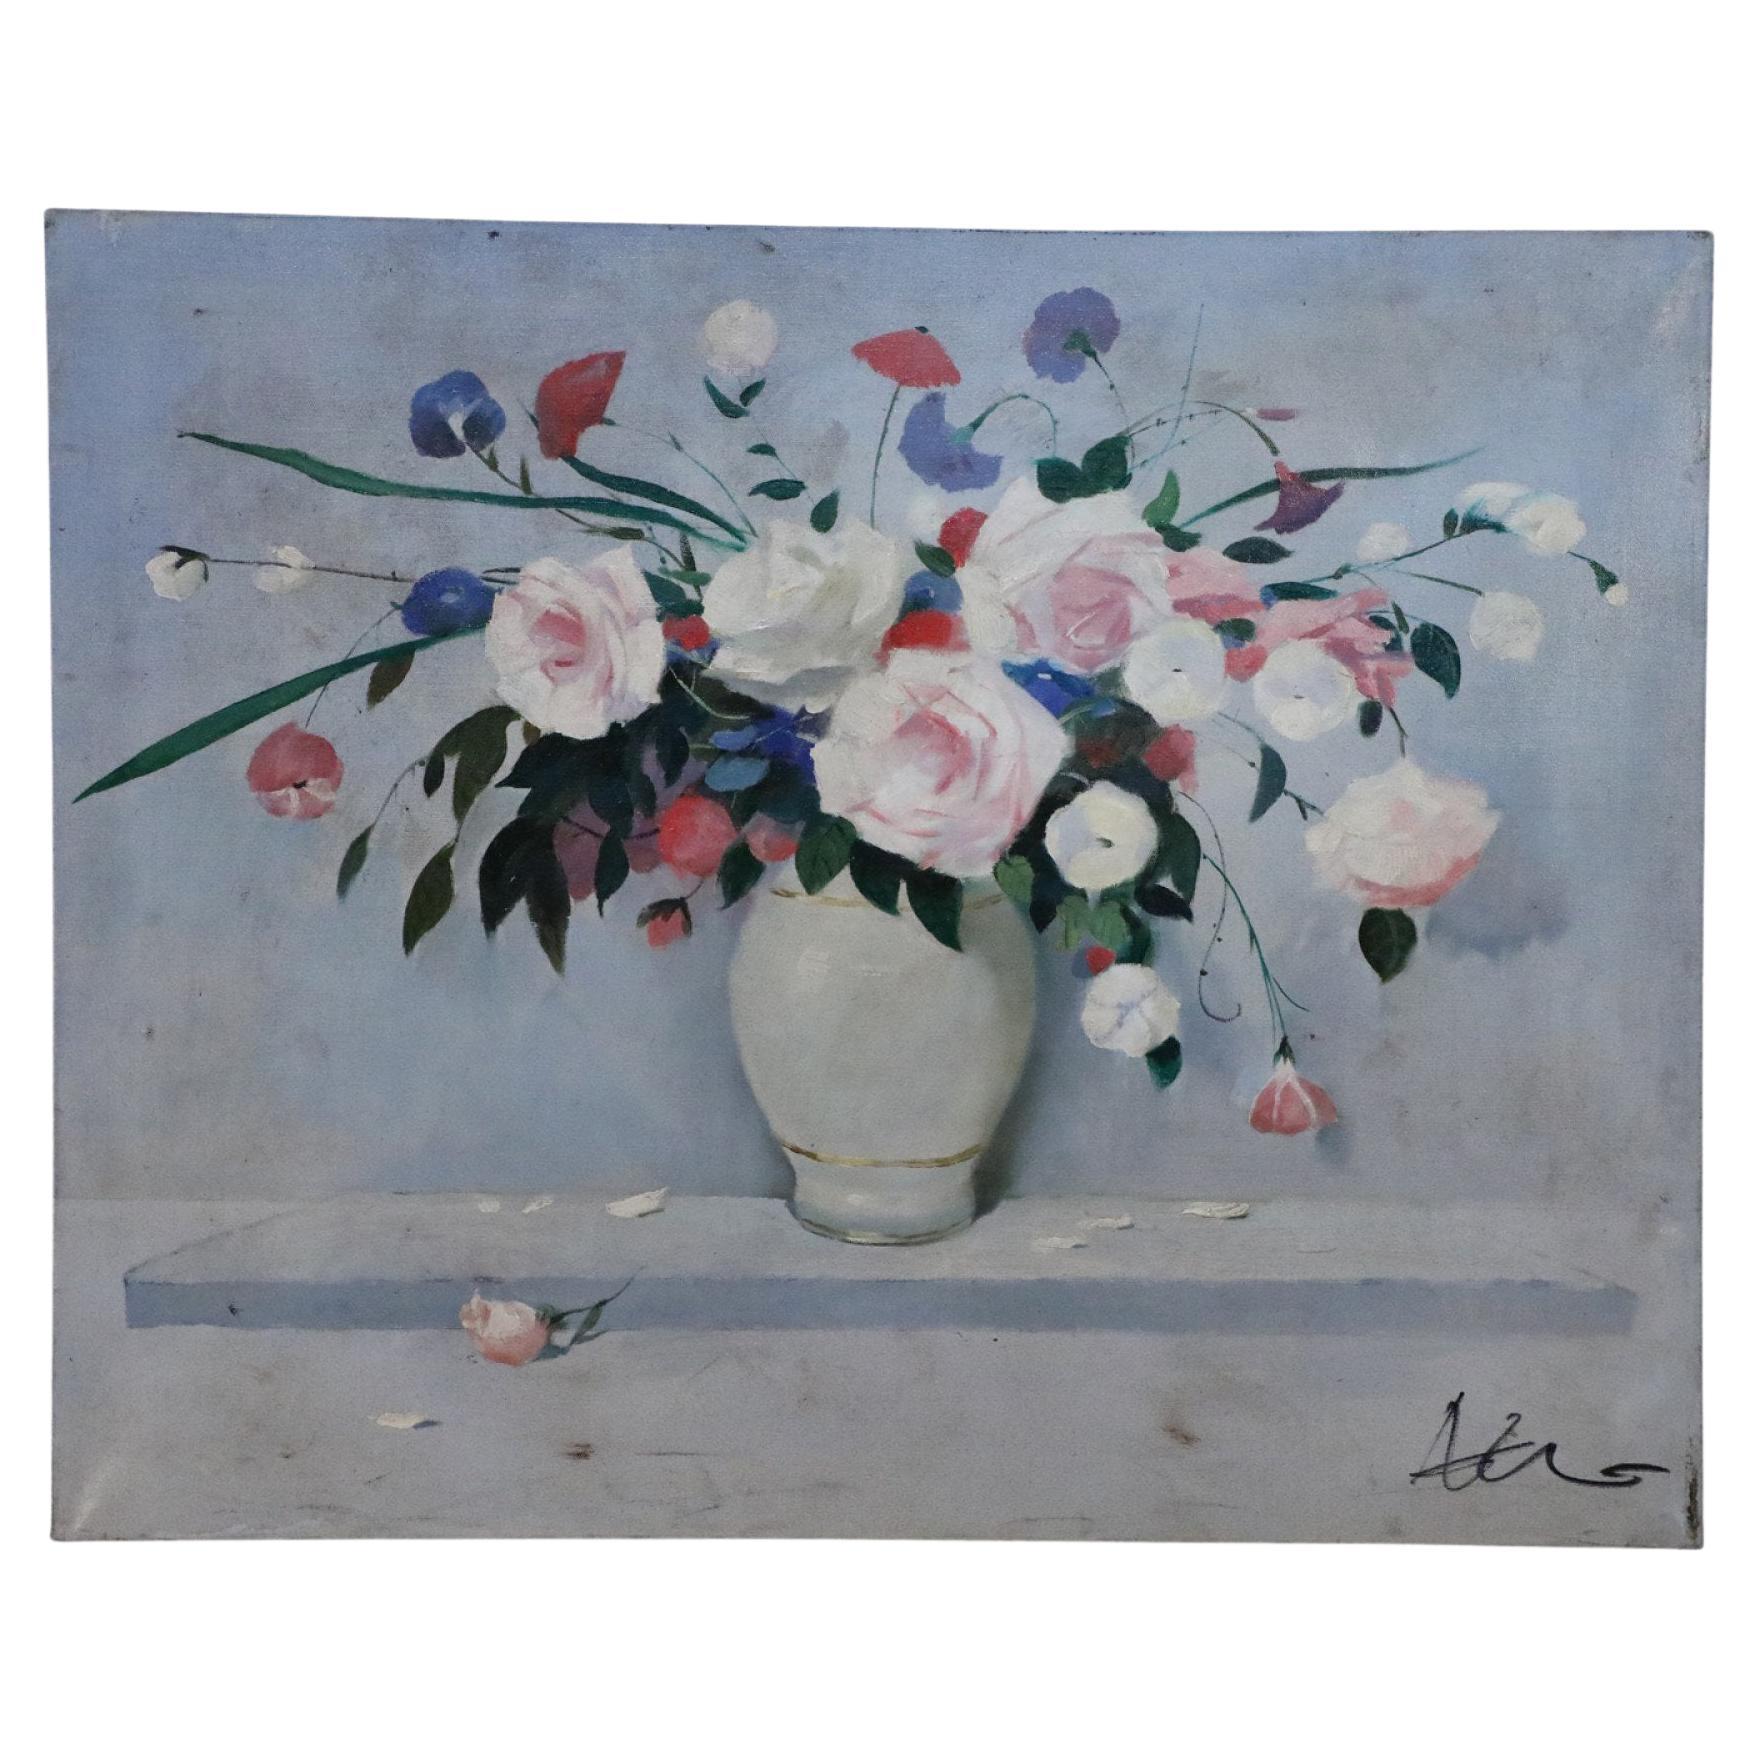 Floral Arrangement in White Vase Still Life Painting on Canvas